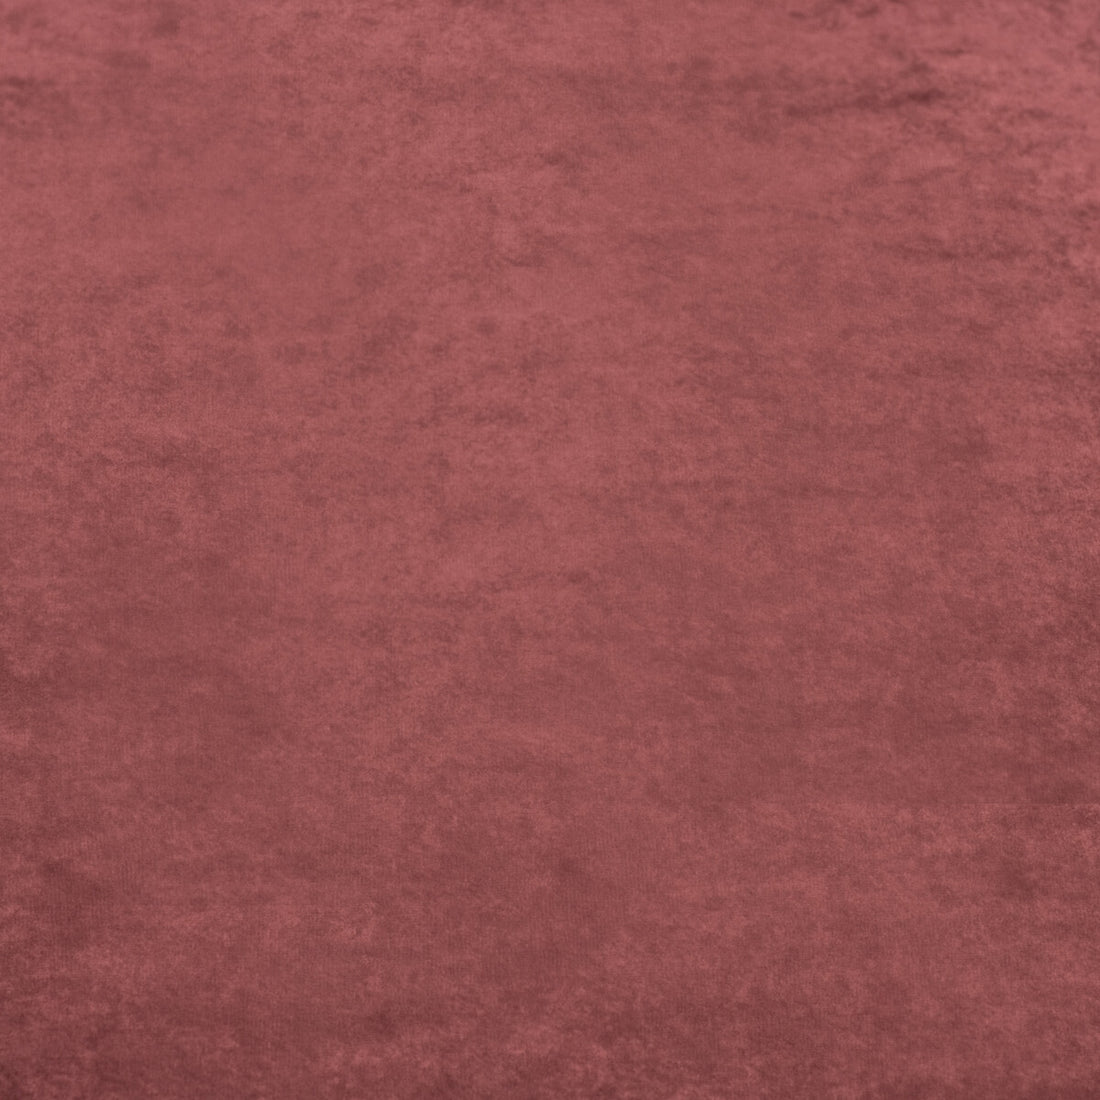 Rossini Velvet fabric in russet color - pattern FD628.V55.0 - by Mulberry in the Imperial collection